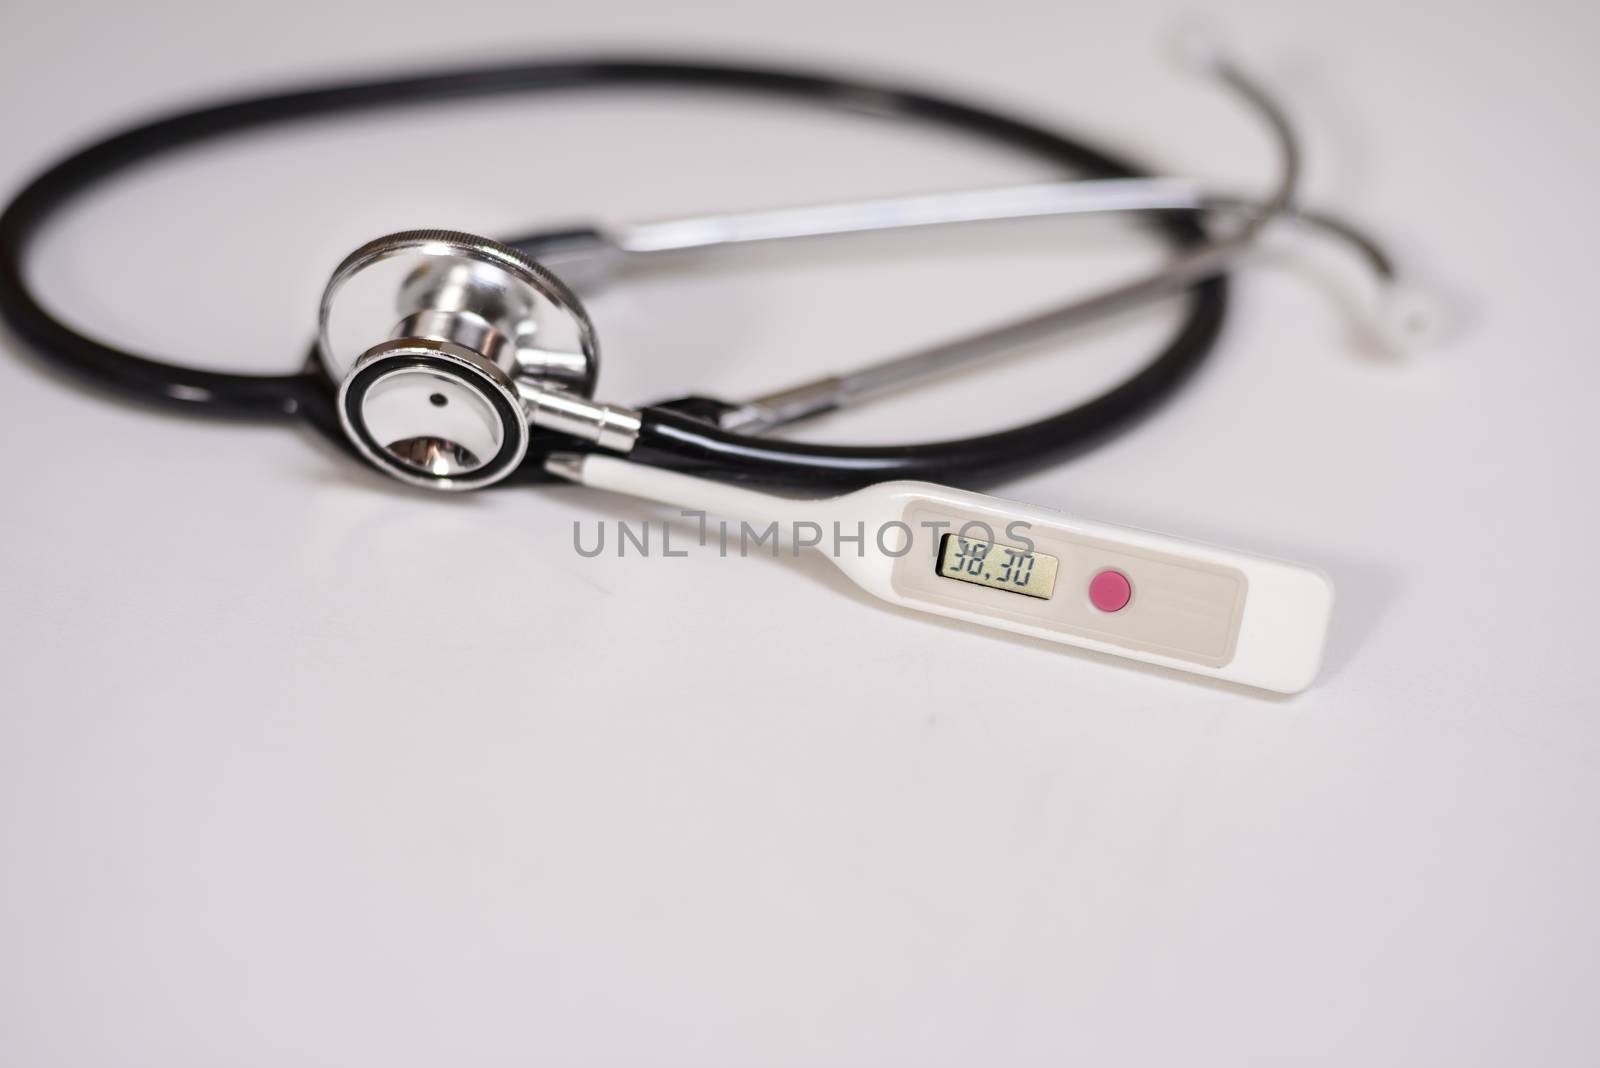 A thermometer and stethoscope by asafaric